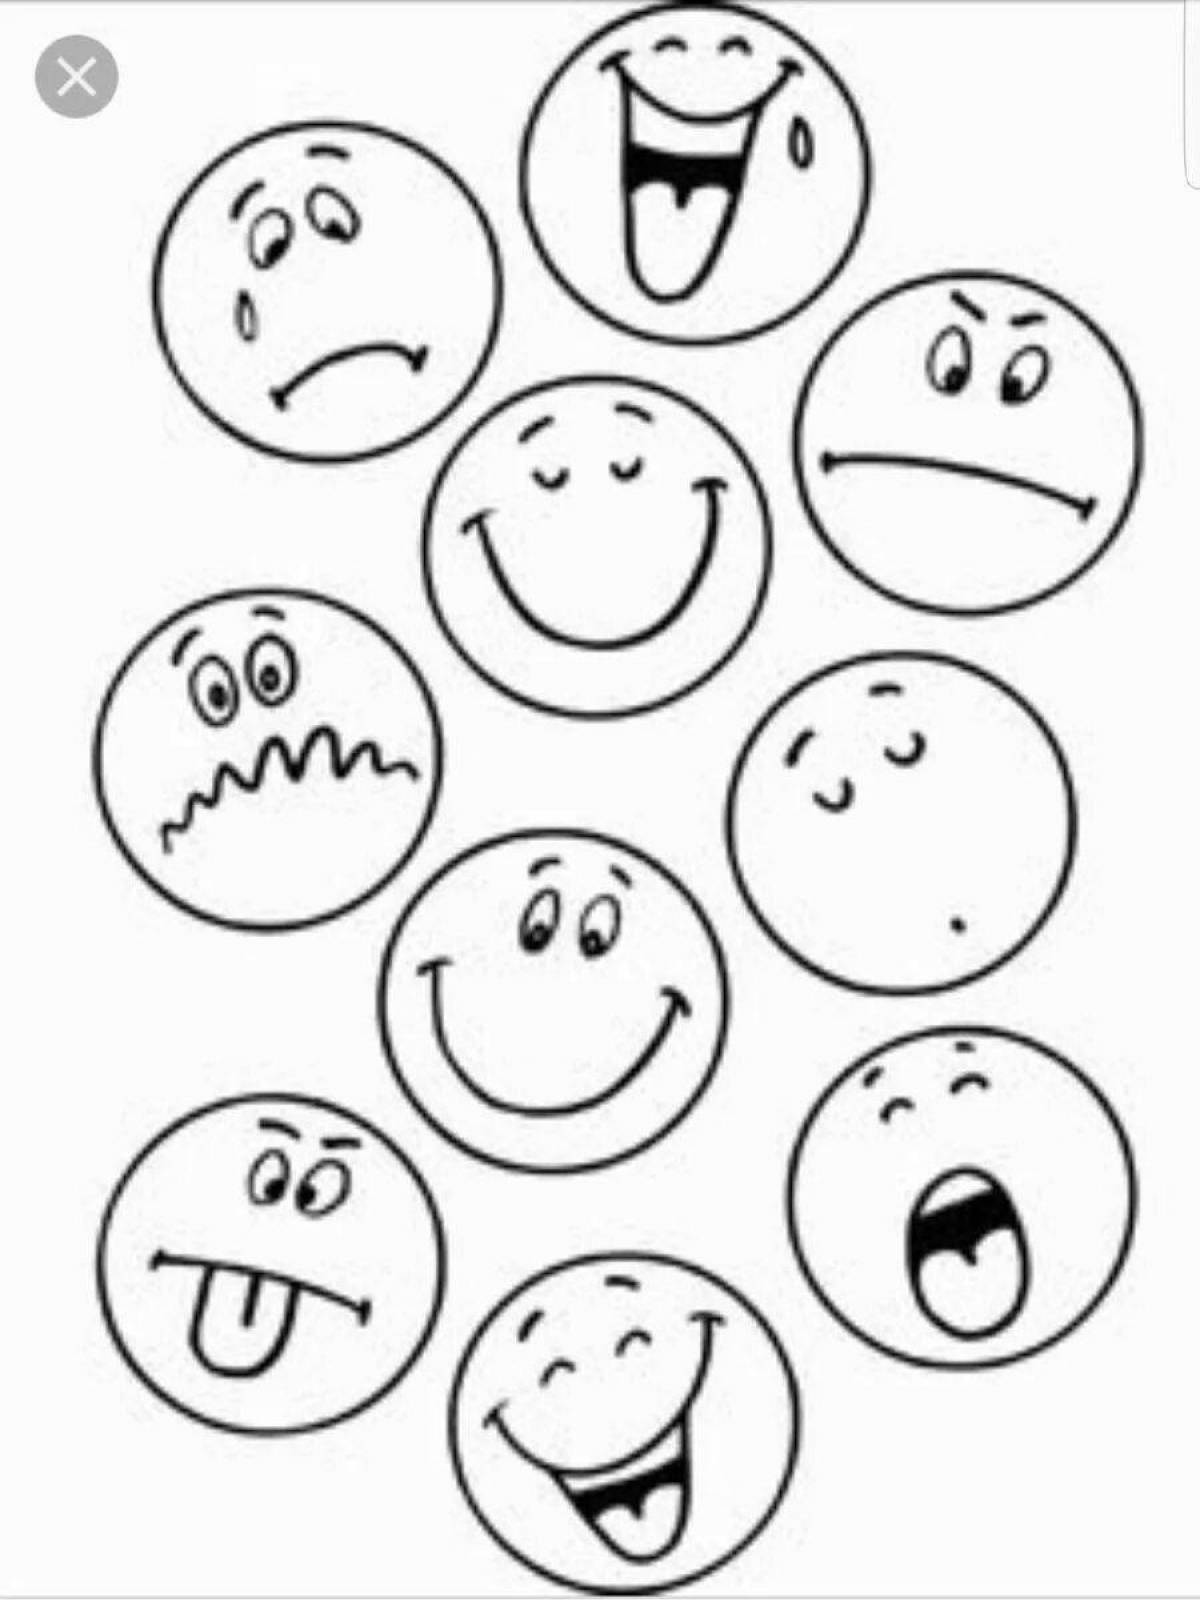 Humorous coloring funny smiley face for kids